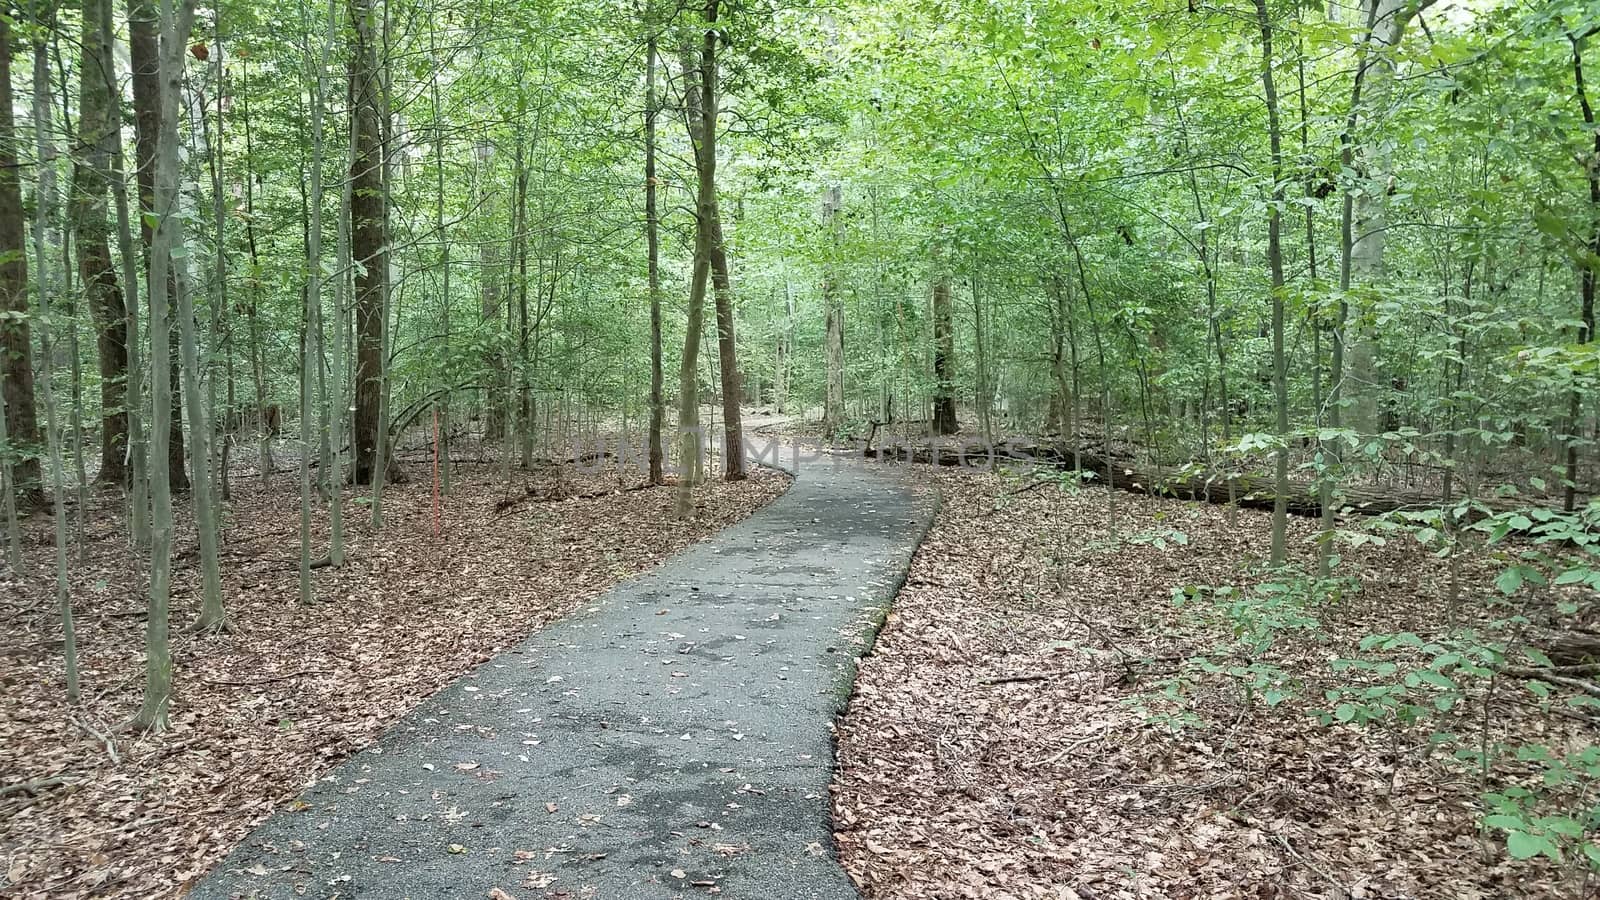 asphalt path or trail in woods or forest with trees